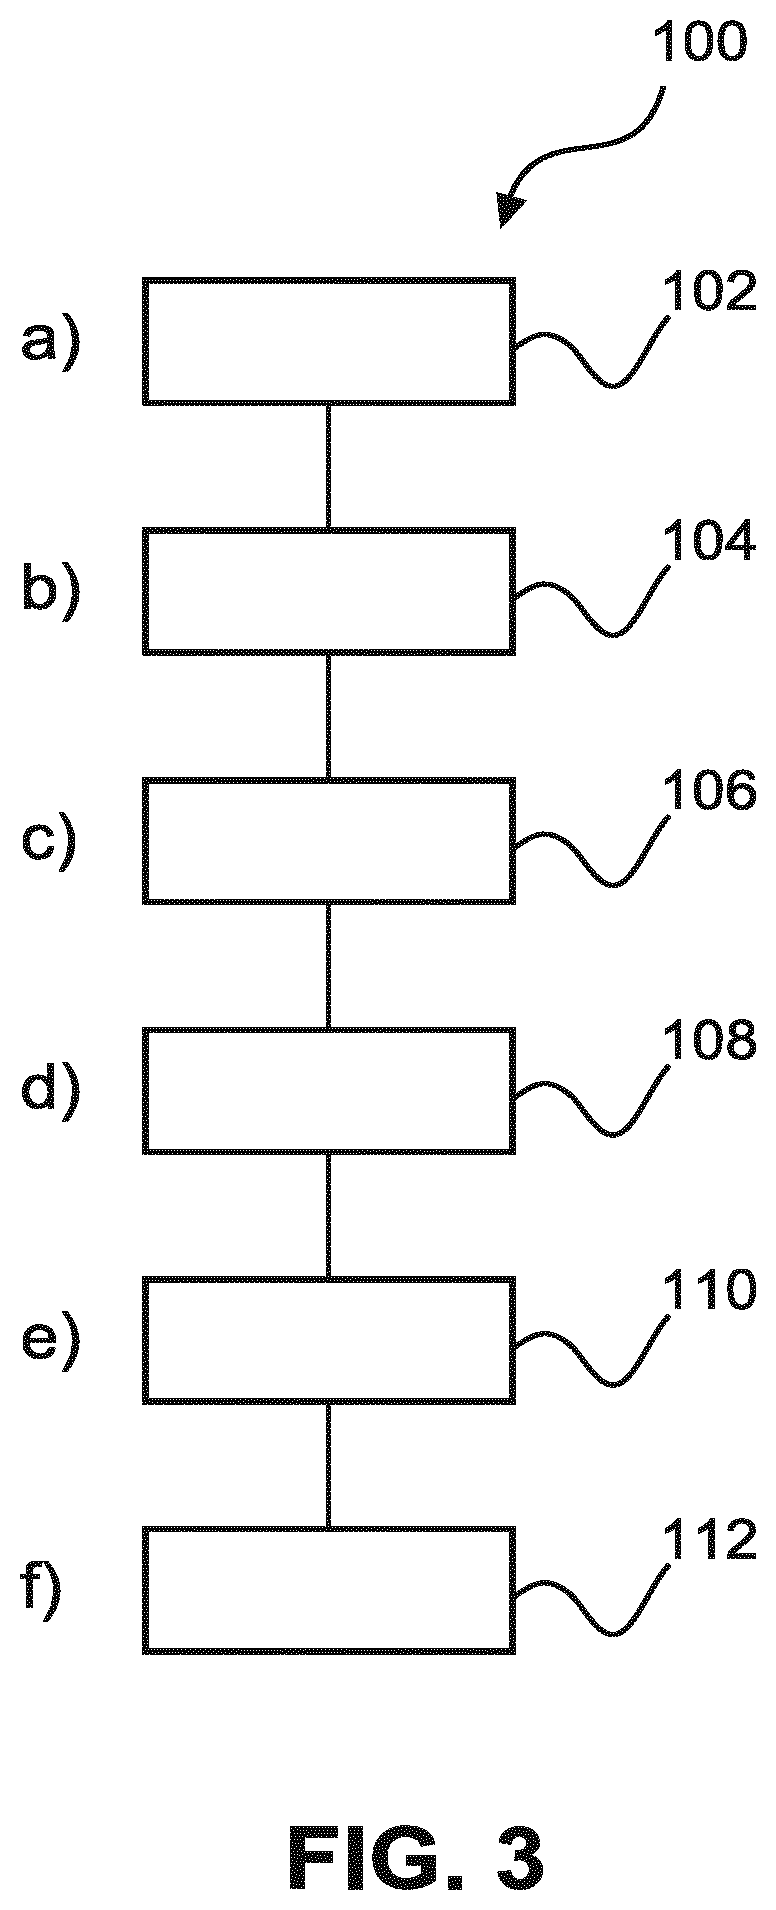 Image based guiding of an interventional device